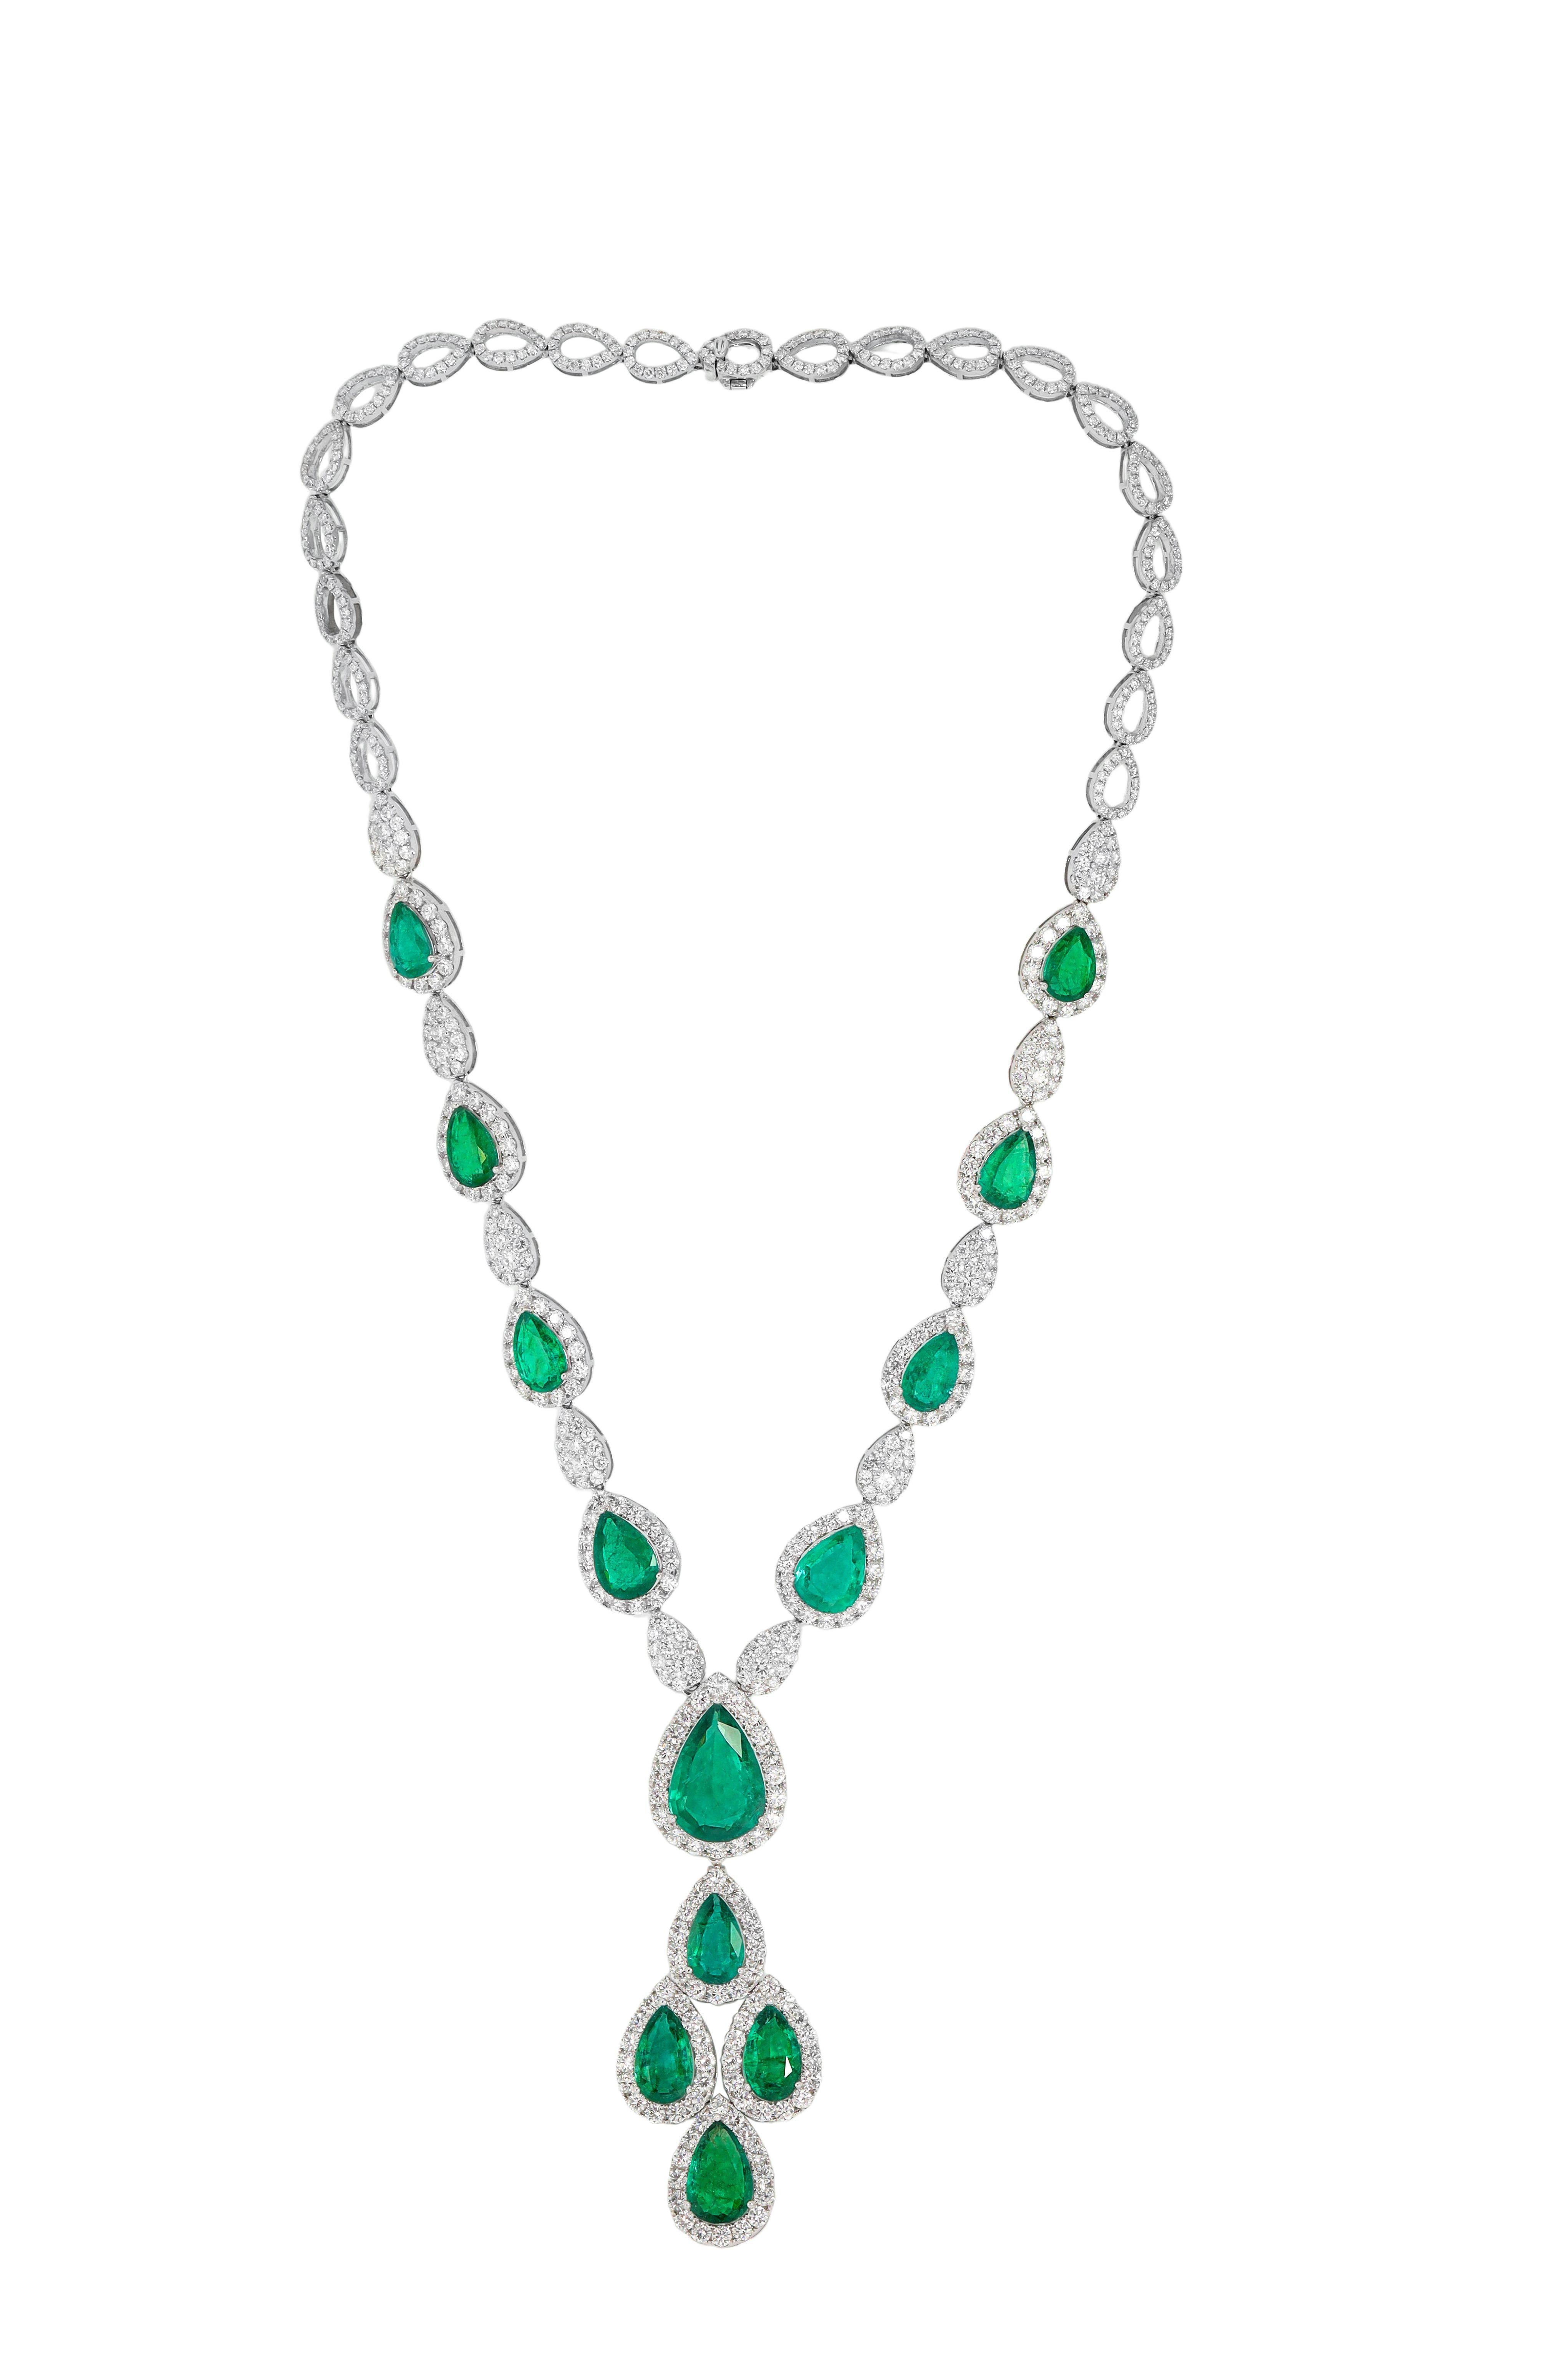 18kt white gold diamond necklace features 32.19 cts pear shape emeralds and 16.80 cts white diamonds. 
C. Dunaigre Certified